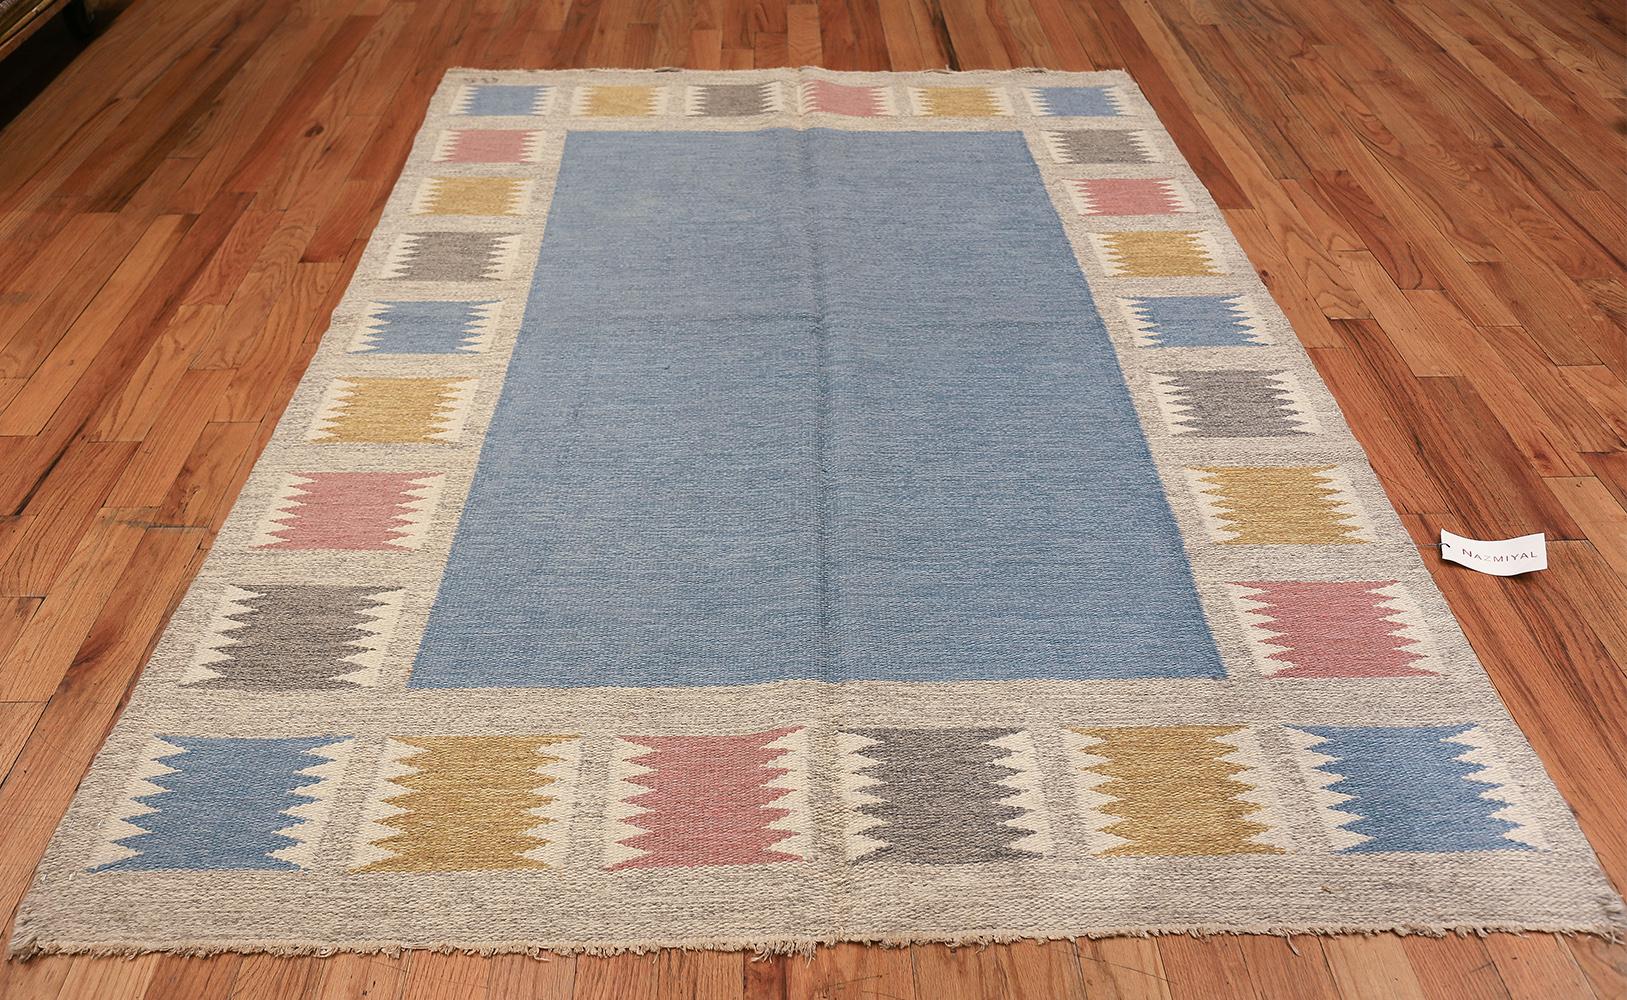 Vintage carpet by Birgitta Soderkvist, Sweden, mid-20th century. Size: 5 ft. 5 in x 7 ft. 9 in (1.65 m x 2.36 m)

True to its Swedish roots, the carpet features a Minimalist design that relies on subtle movements and vibrant colors to create depth